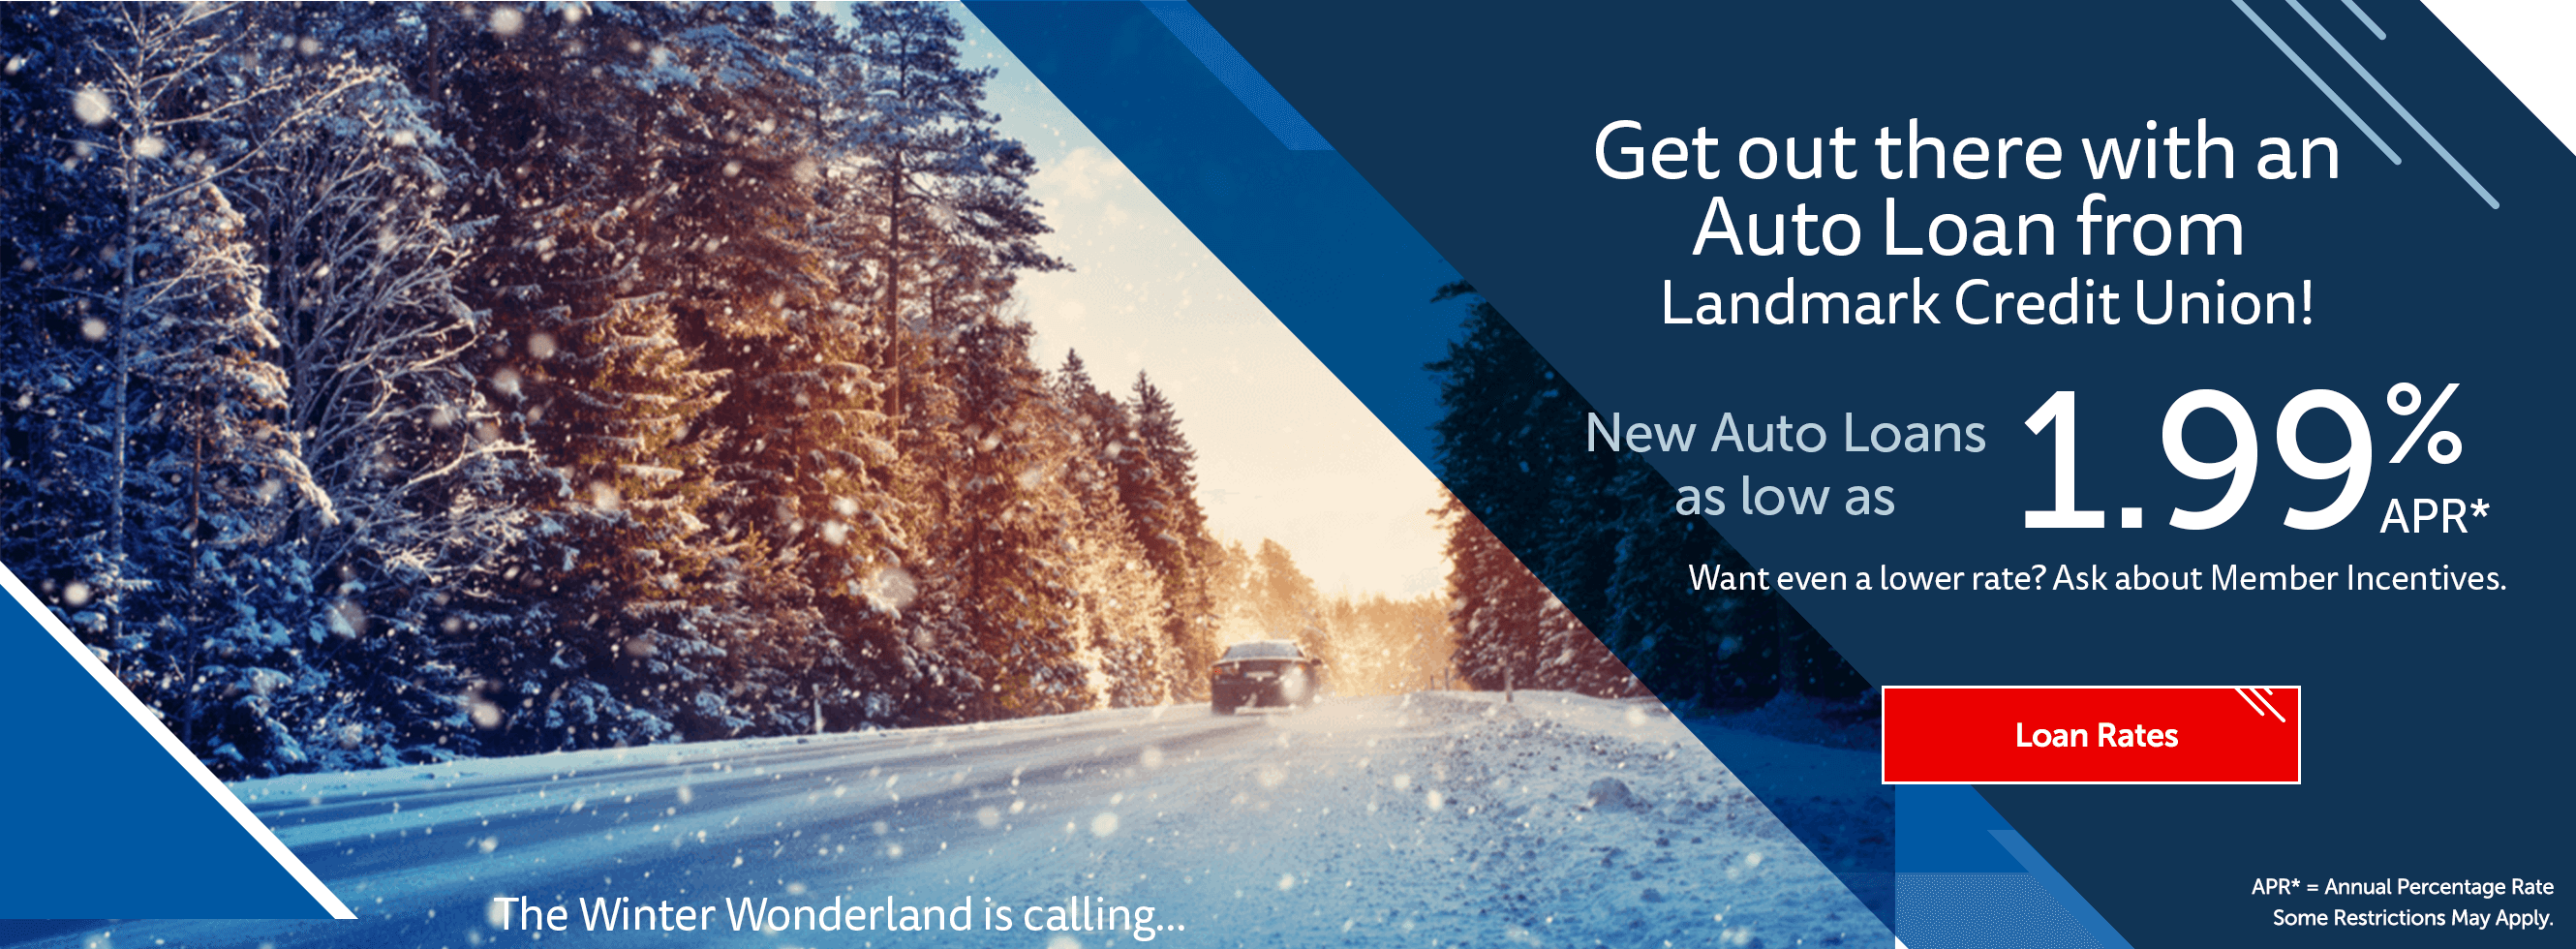 Get out there with an Auto Loan from Landmark Credit Union